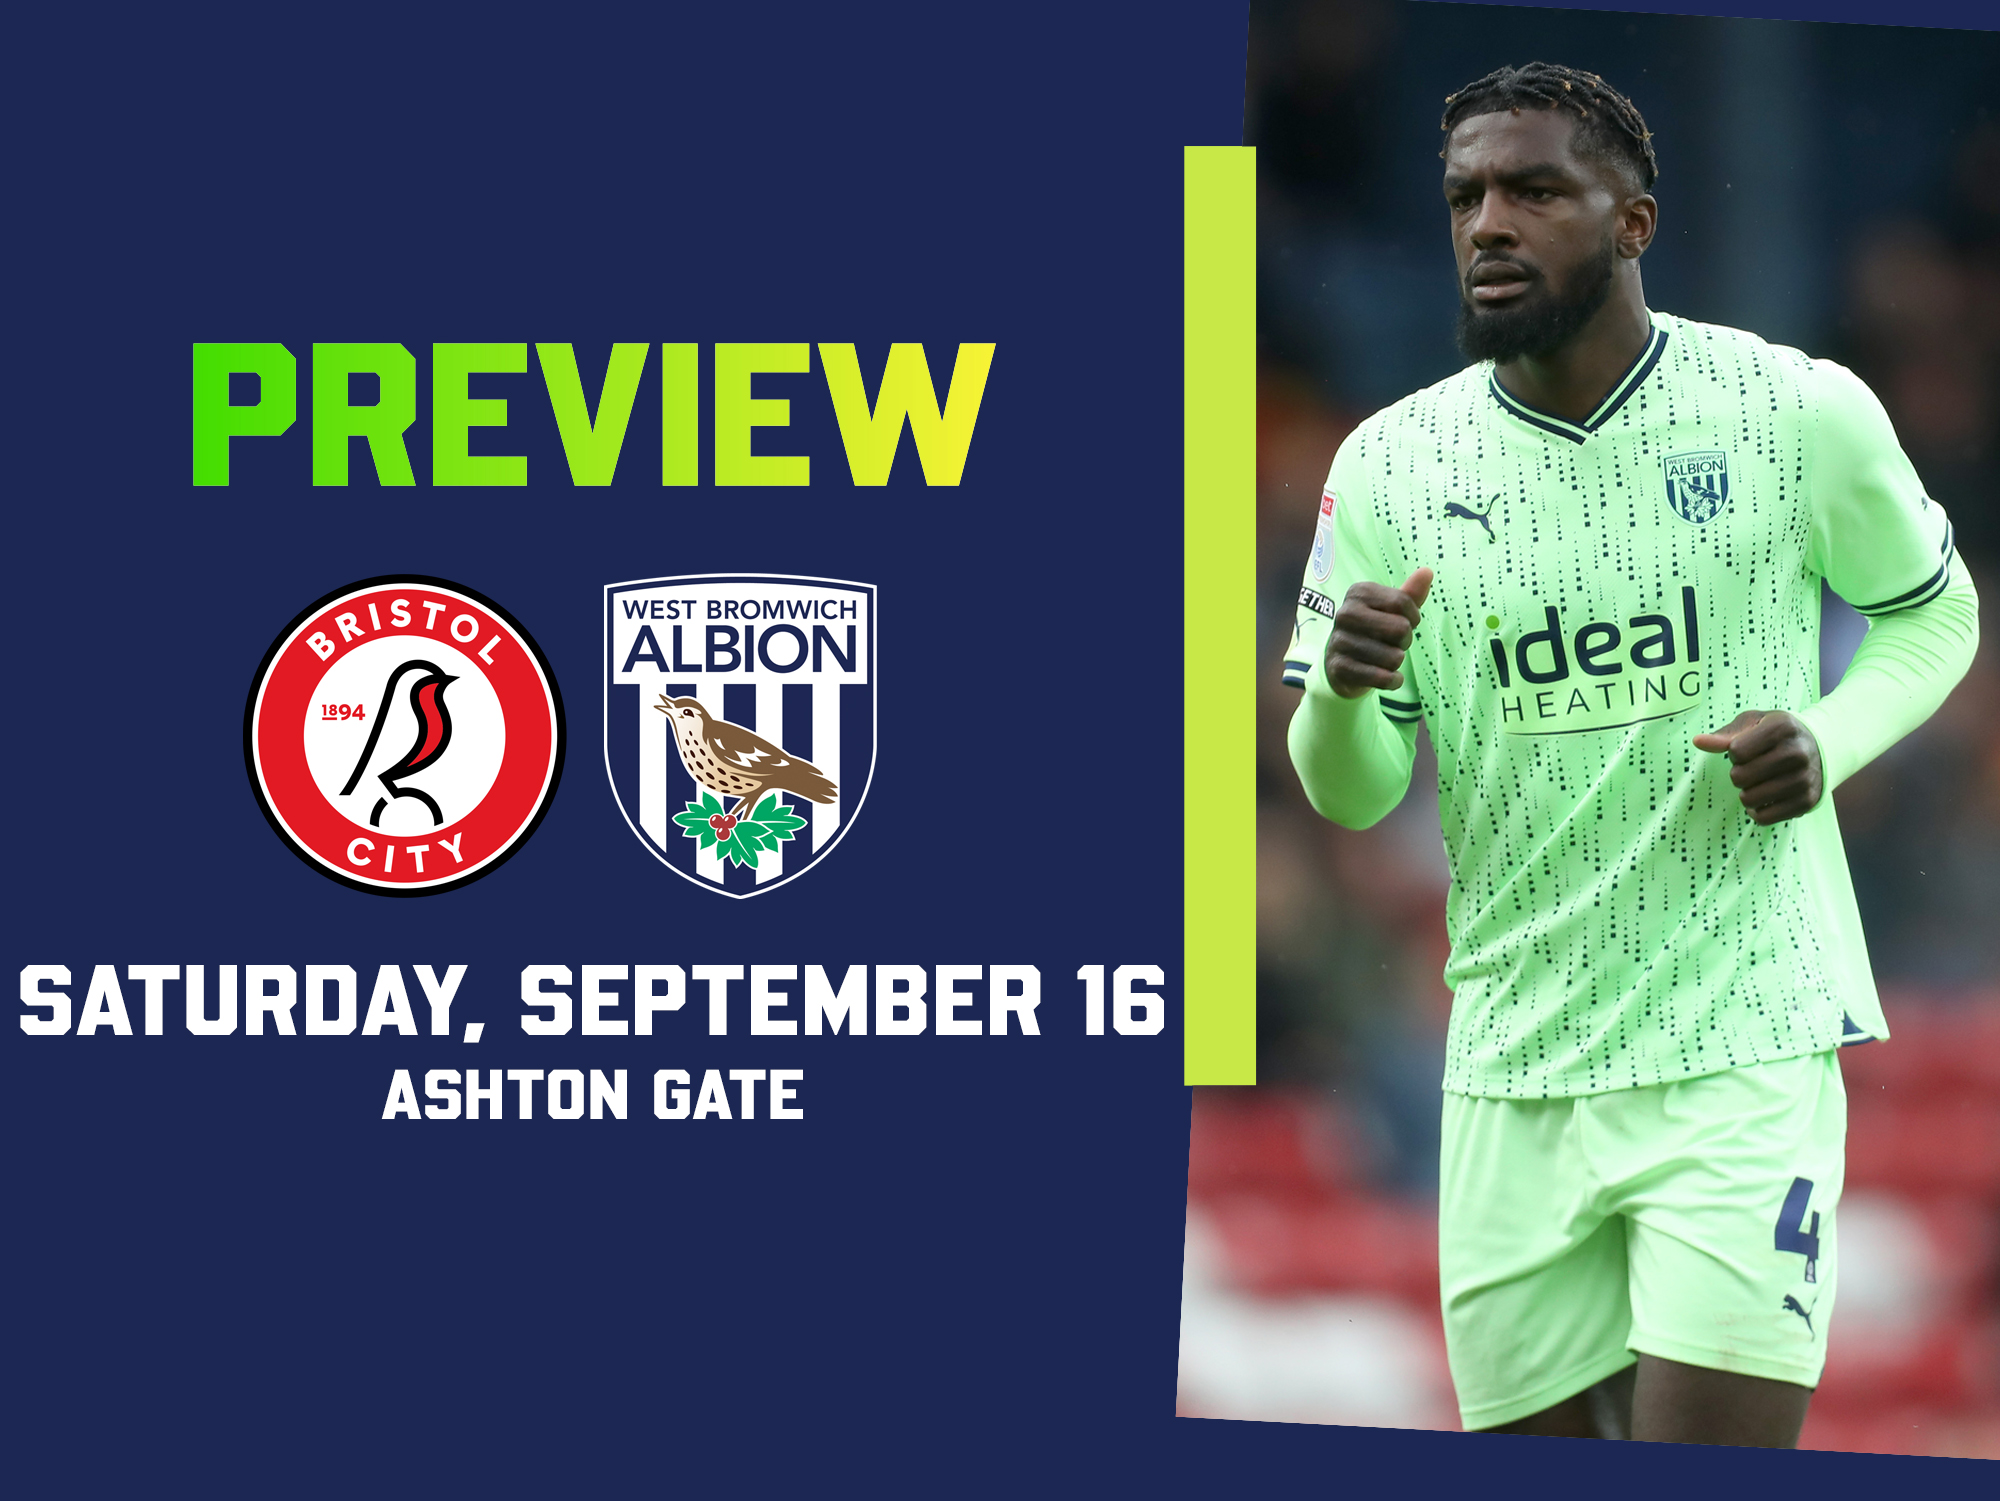 Bristol City and WBA badges next to an image of Cedric Kipre in the green away kit